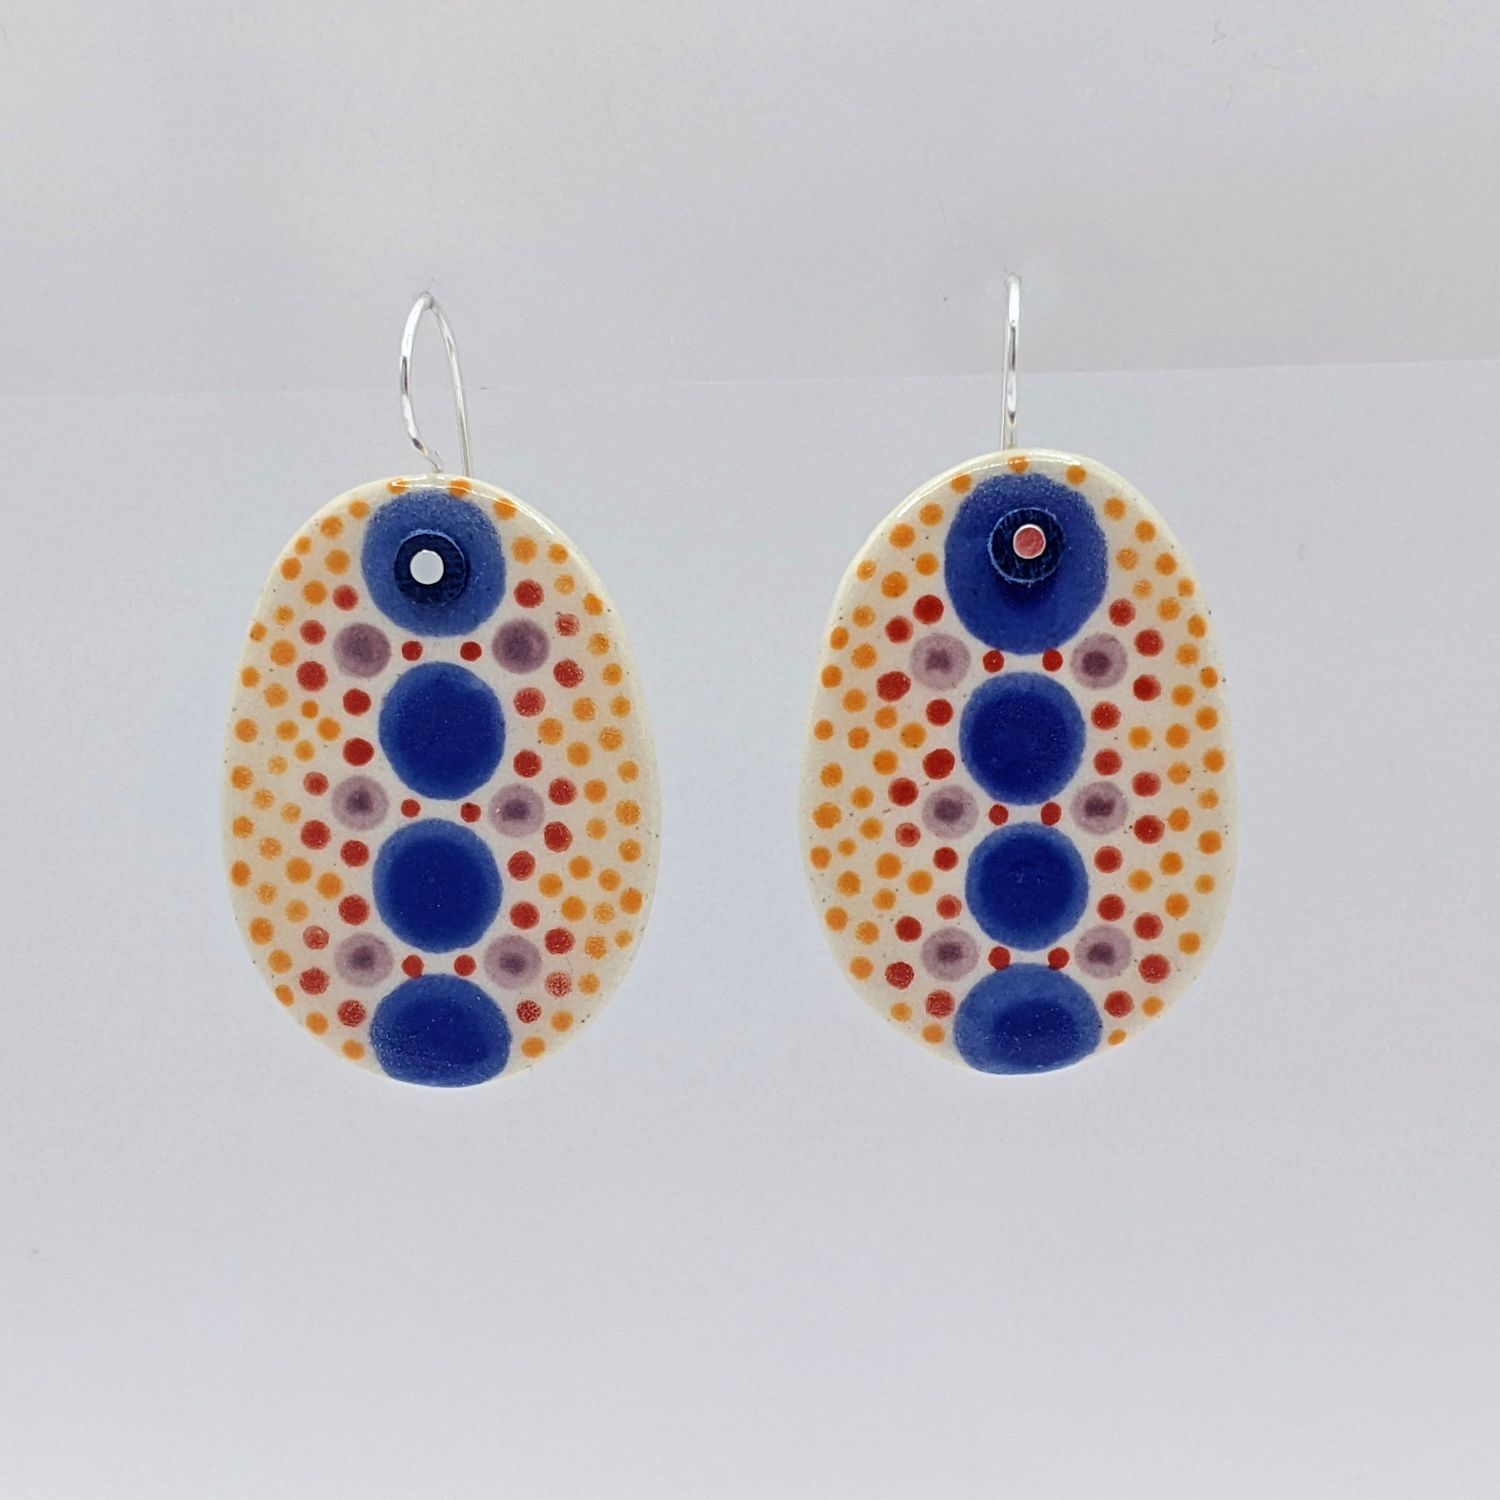 Here and Here: Blue and Multi-Coloured Dotted Ceramic Disc Earrings Product Image 1 of 2